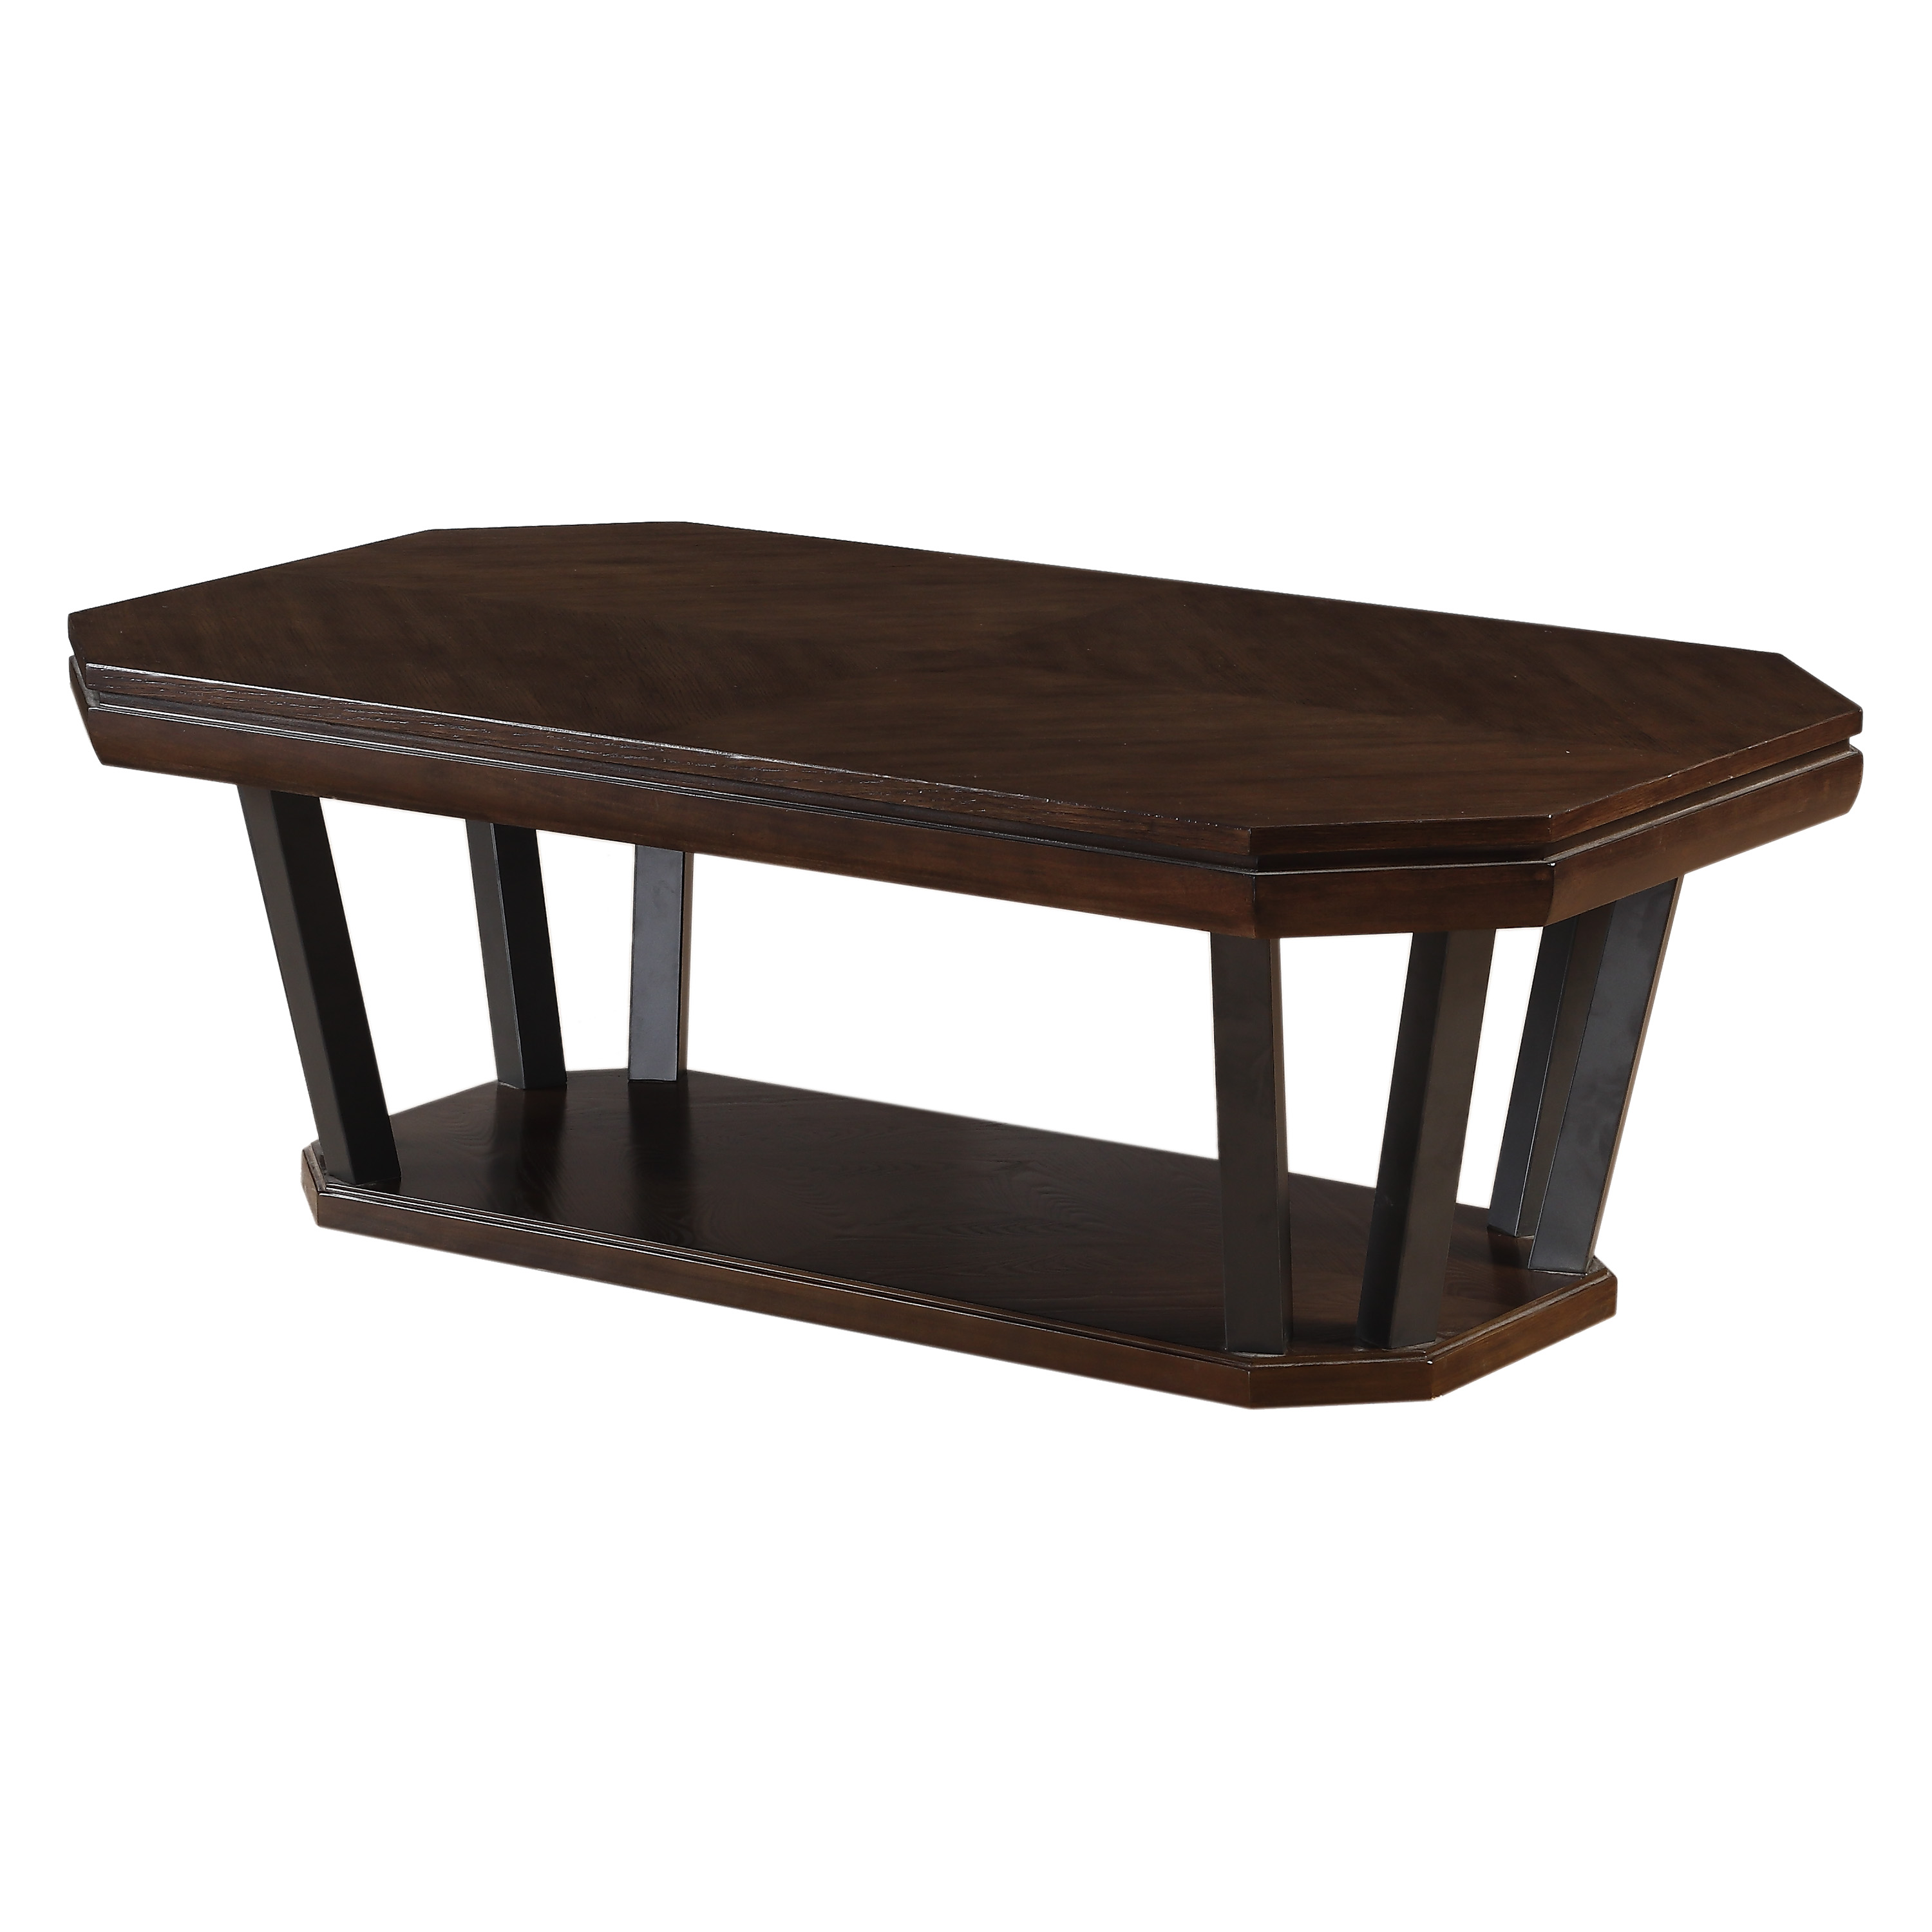 Acme Rectangular Coffee Table in Tobacco Finish 84090 - image 2 of 2